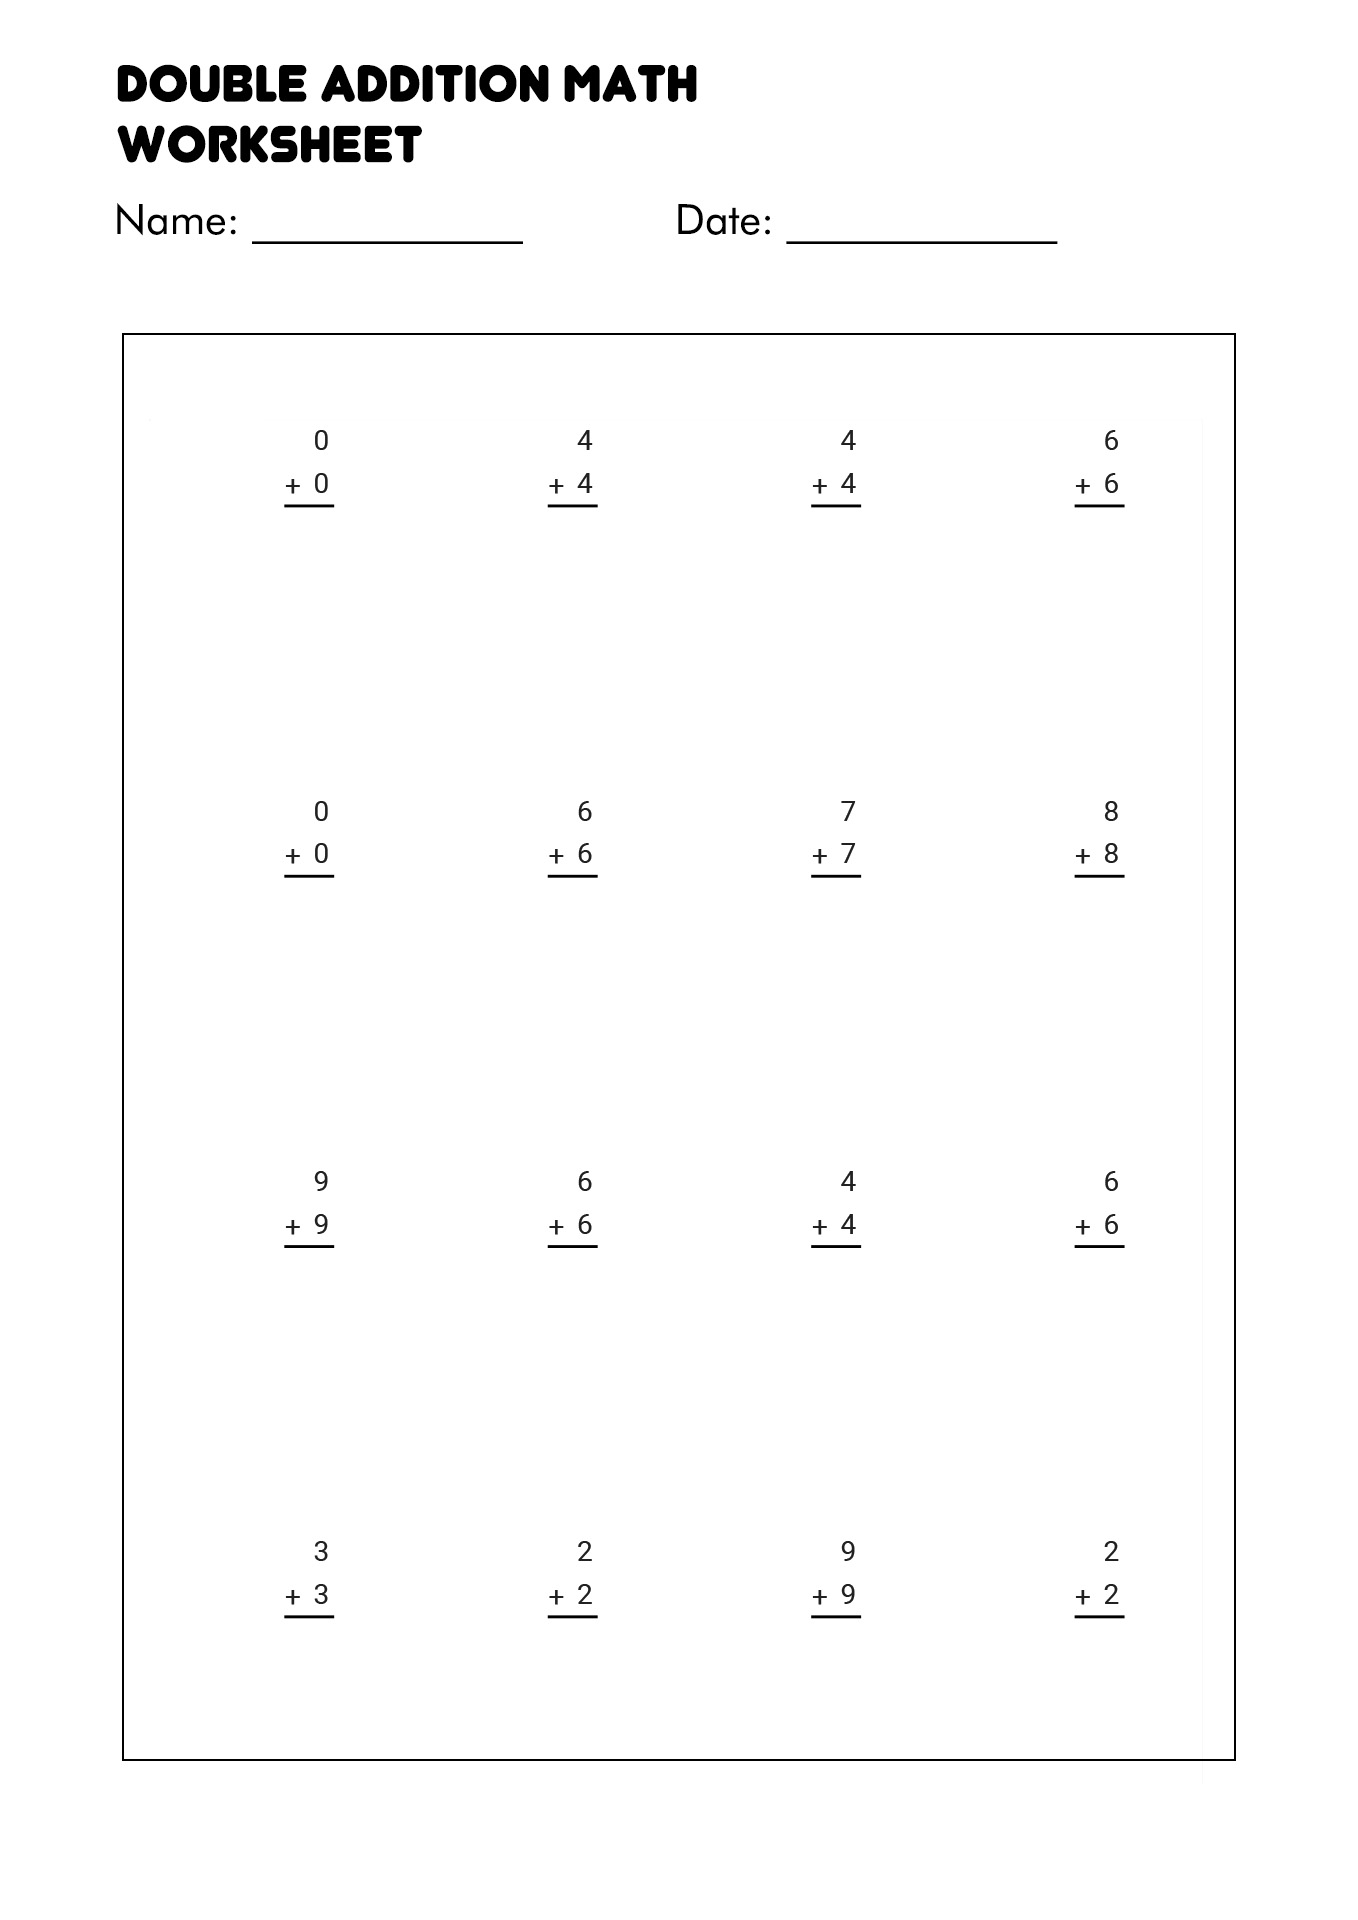 Double Addition Math Worksheets for 2nd Grade